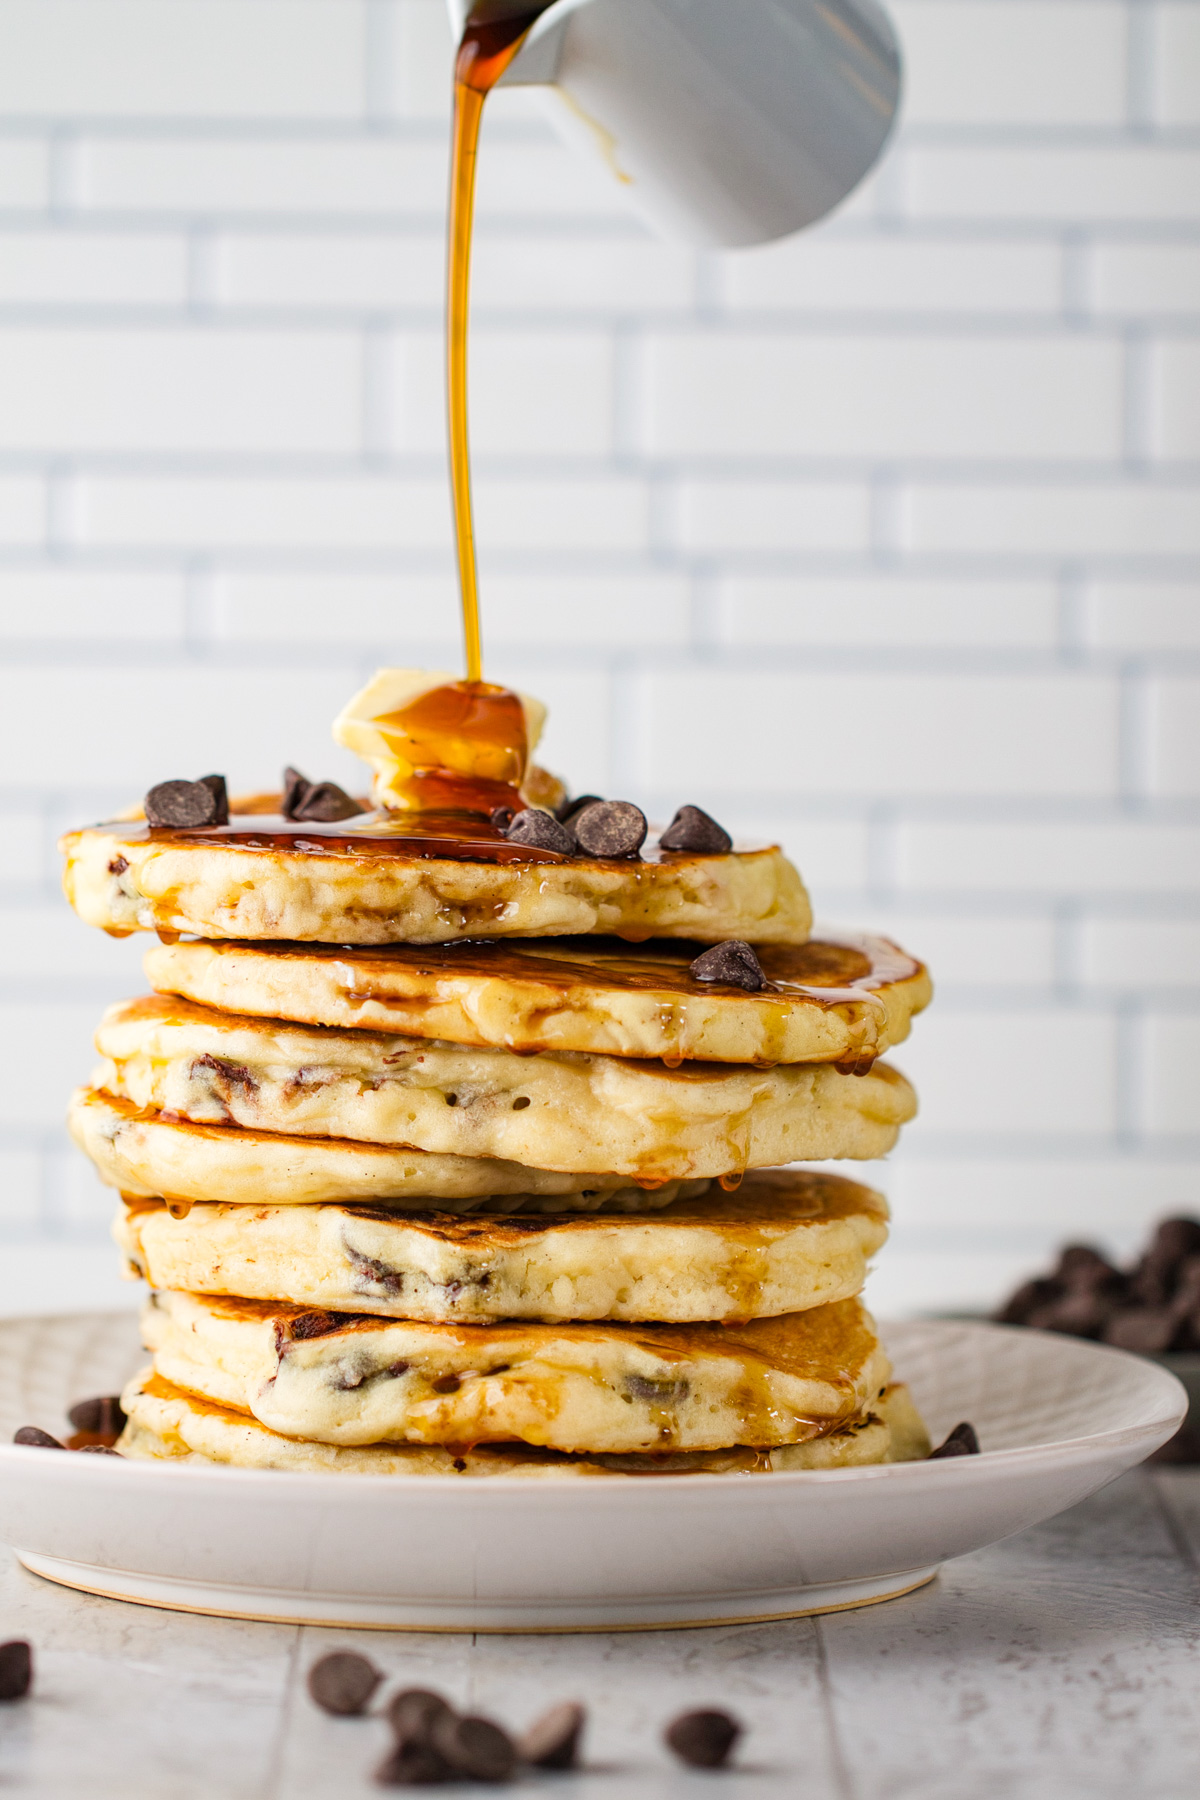 Syrup being poured over a stack of chocolate chip pancakes topped with pats of butter.